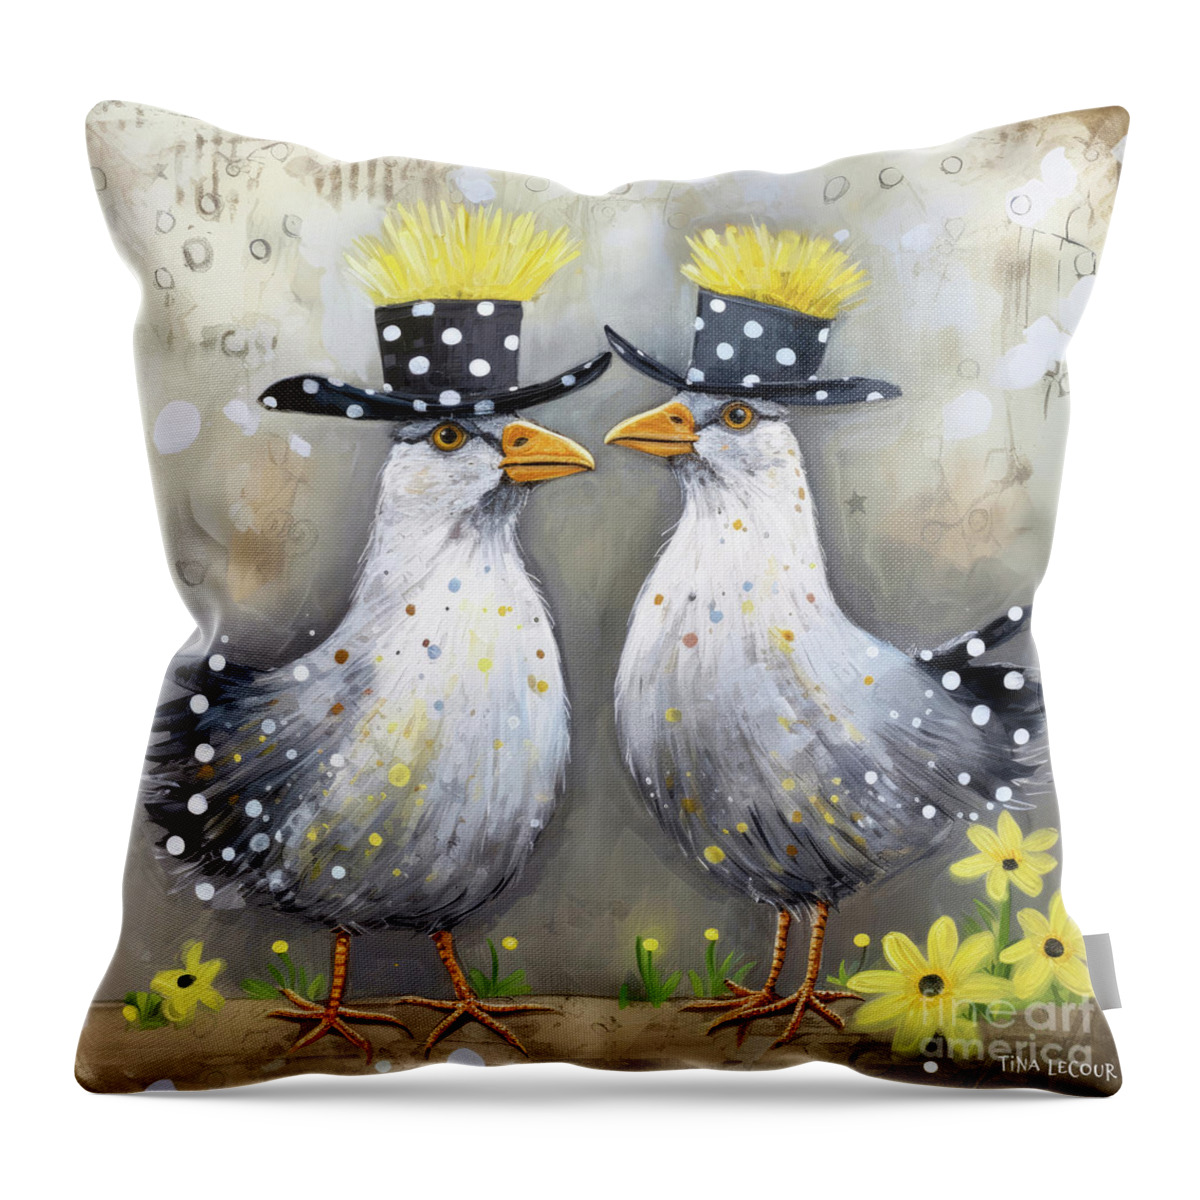 Chickens Throw Pillow featuring the painting Dressed For The Derby by Tina LeCour